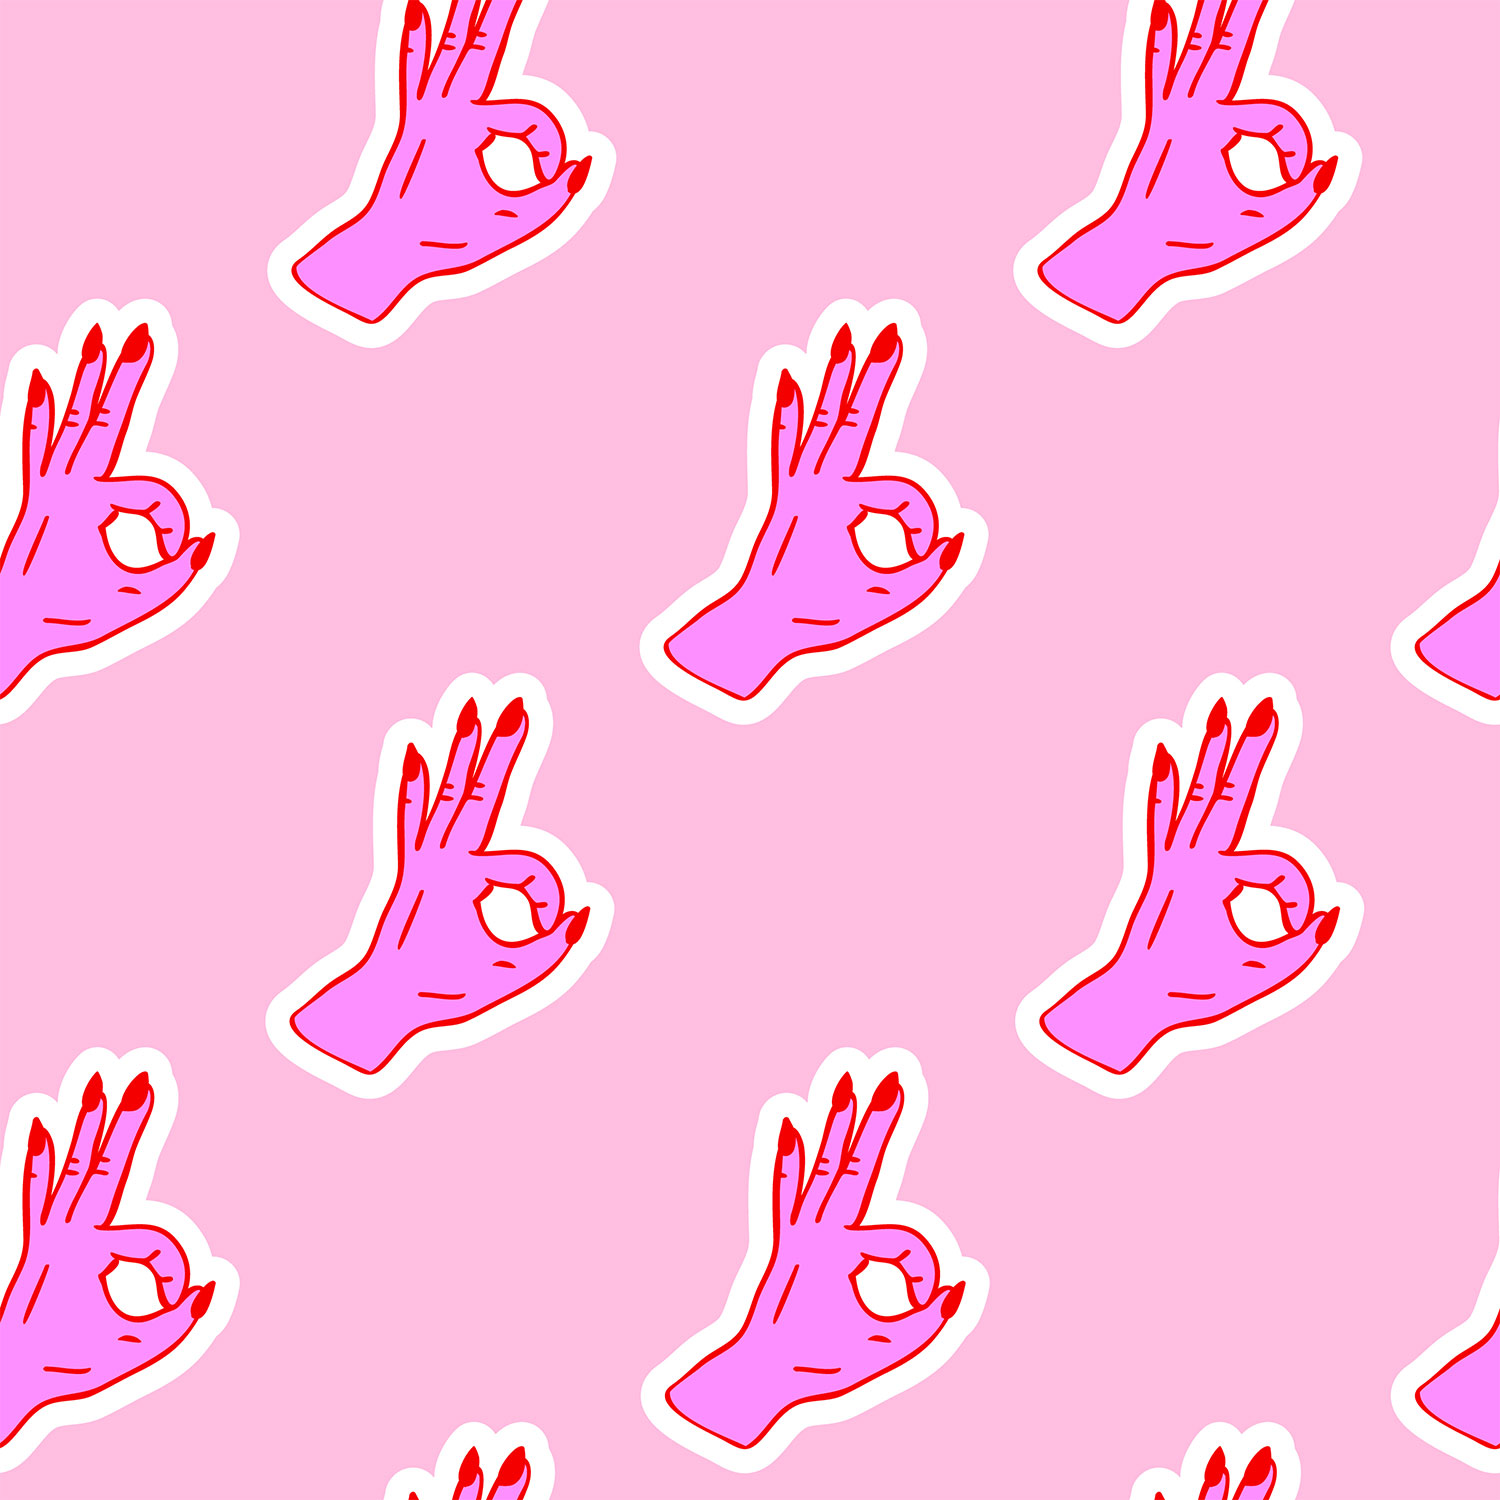 pattern of hands with long painted fingernails doing the OK hand sign symbol on a pink background.